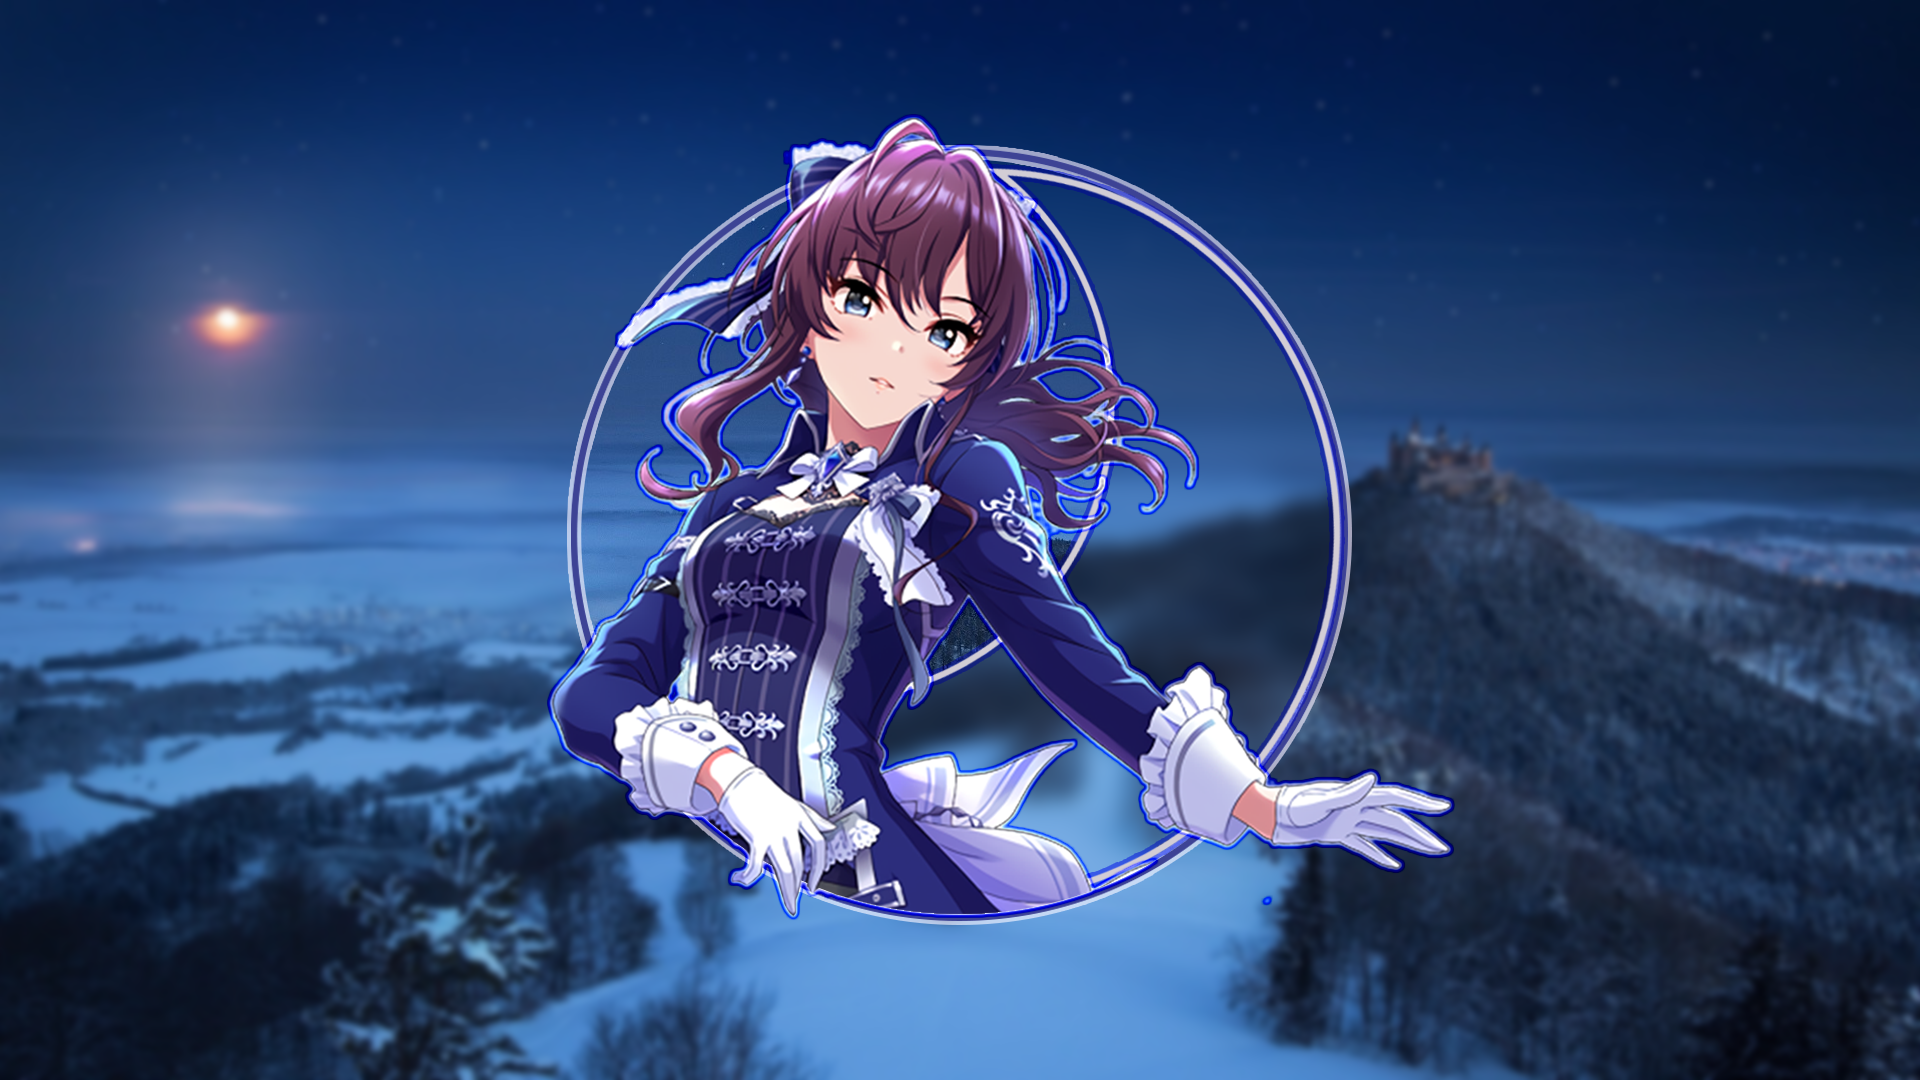 Anime 1920x1080 THE iDOLM@STER: Cinderella Girls anime girls picture-in-picture snow castle mountains forest THE iDOLM@STER